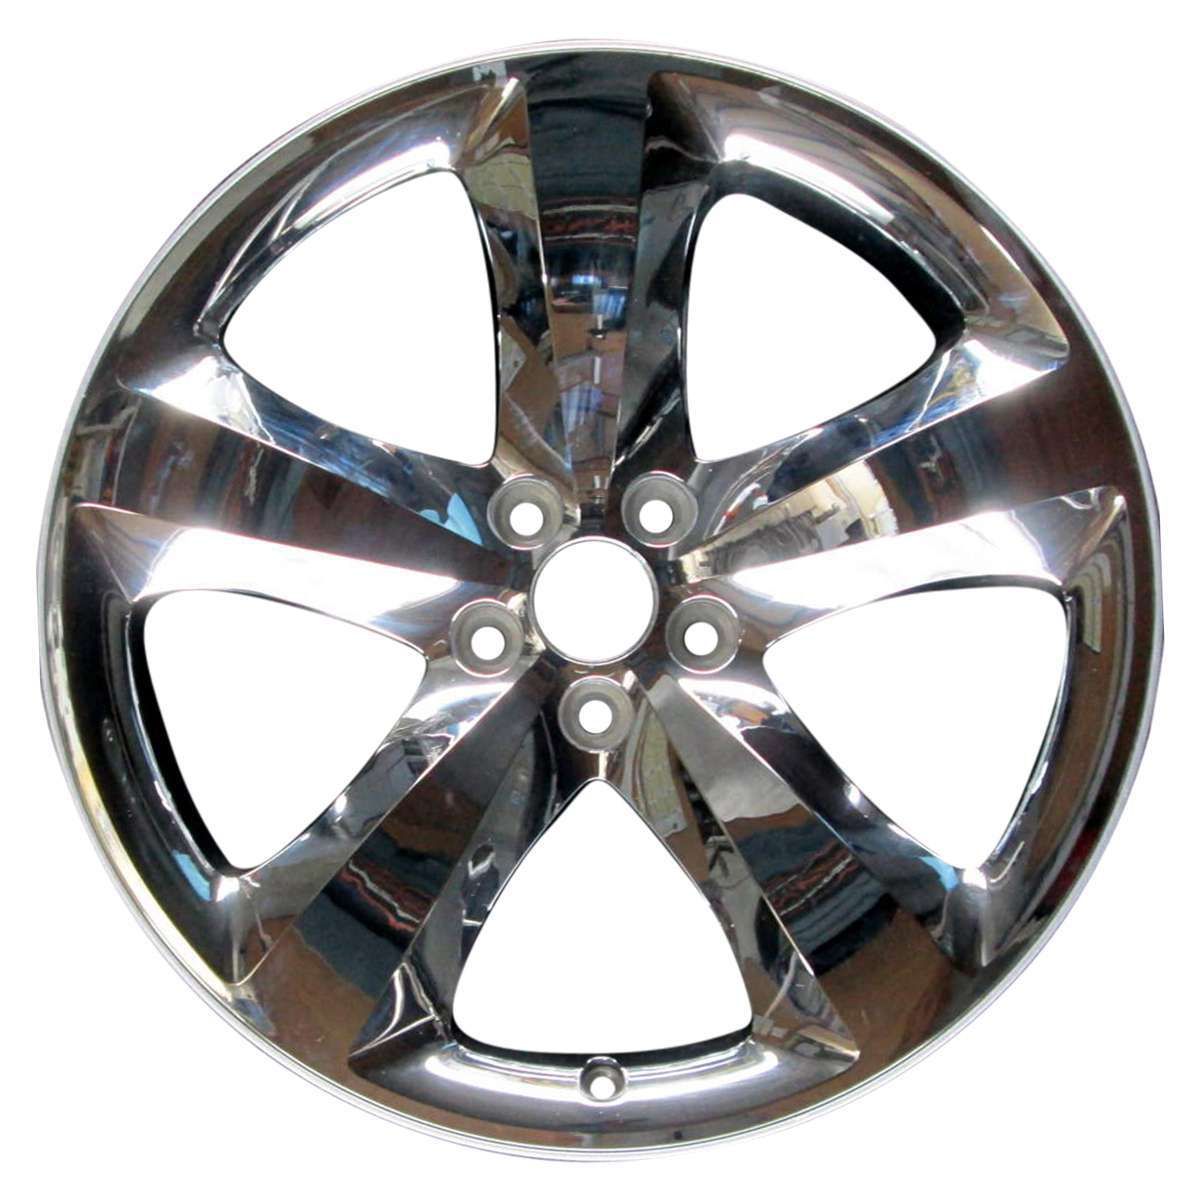 2013 Dodge Charger New 20" Replacement Wheel Rim RW2411XCCLAD